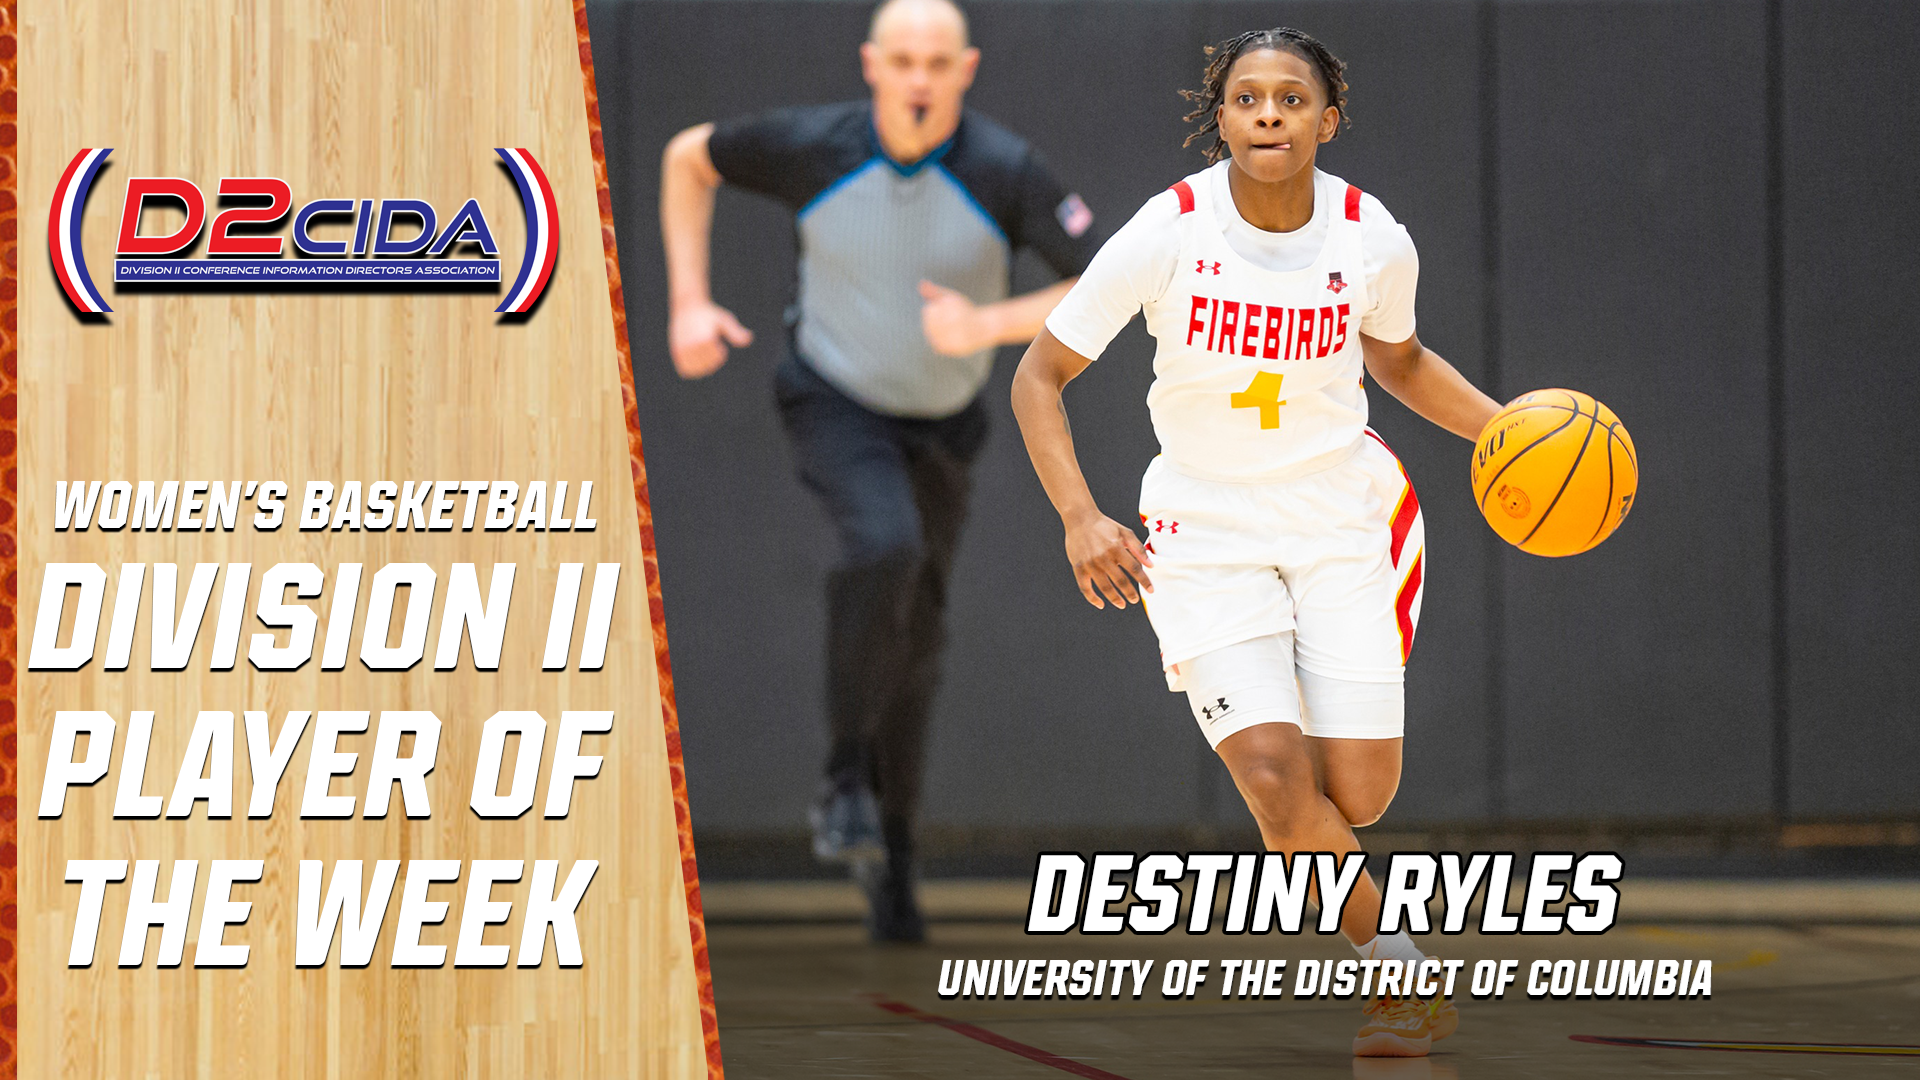 Destiny Ryles Named D2CIDA Women's Basketball Division II Player of the Week